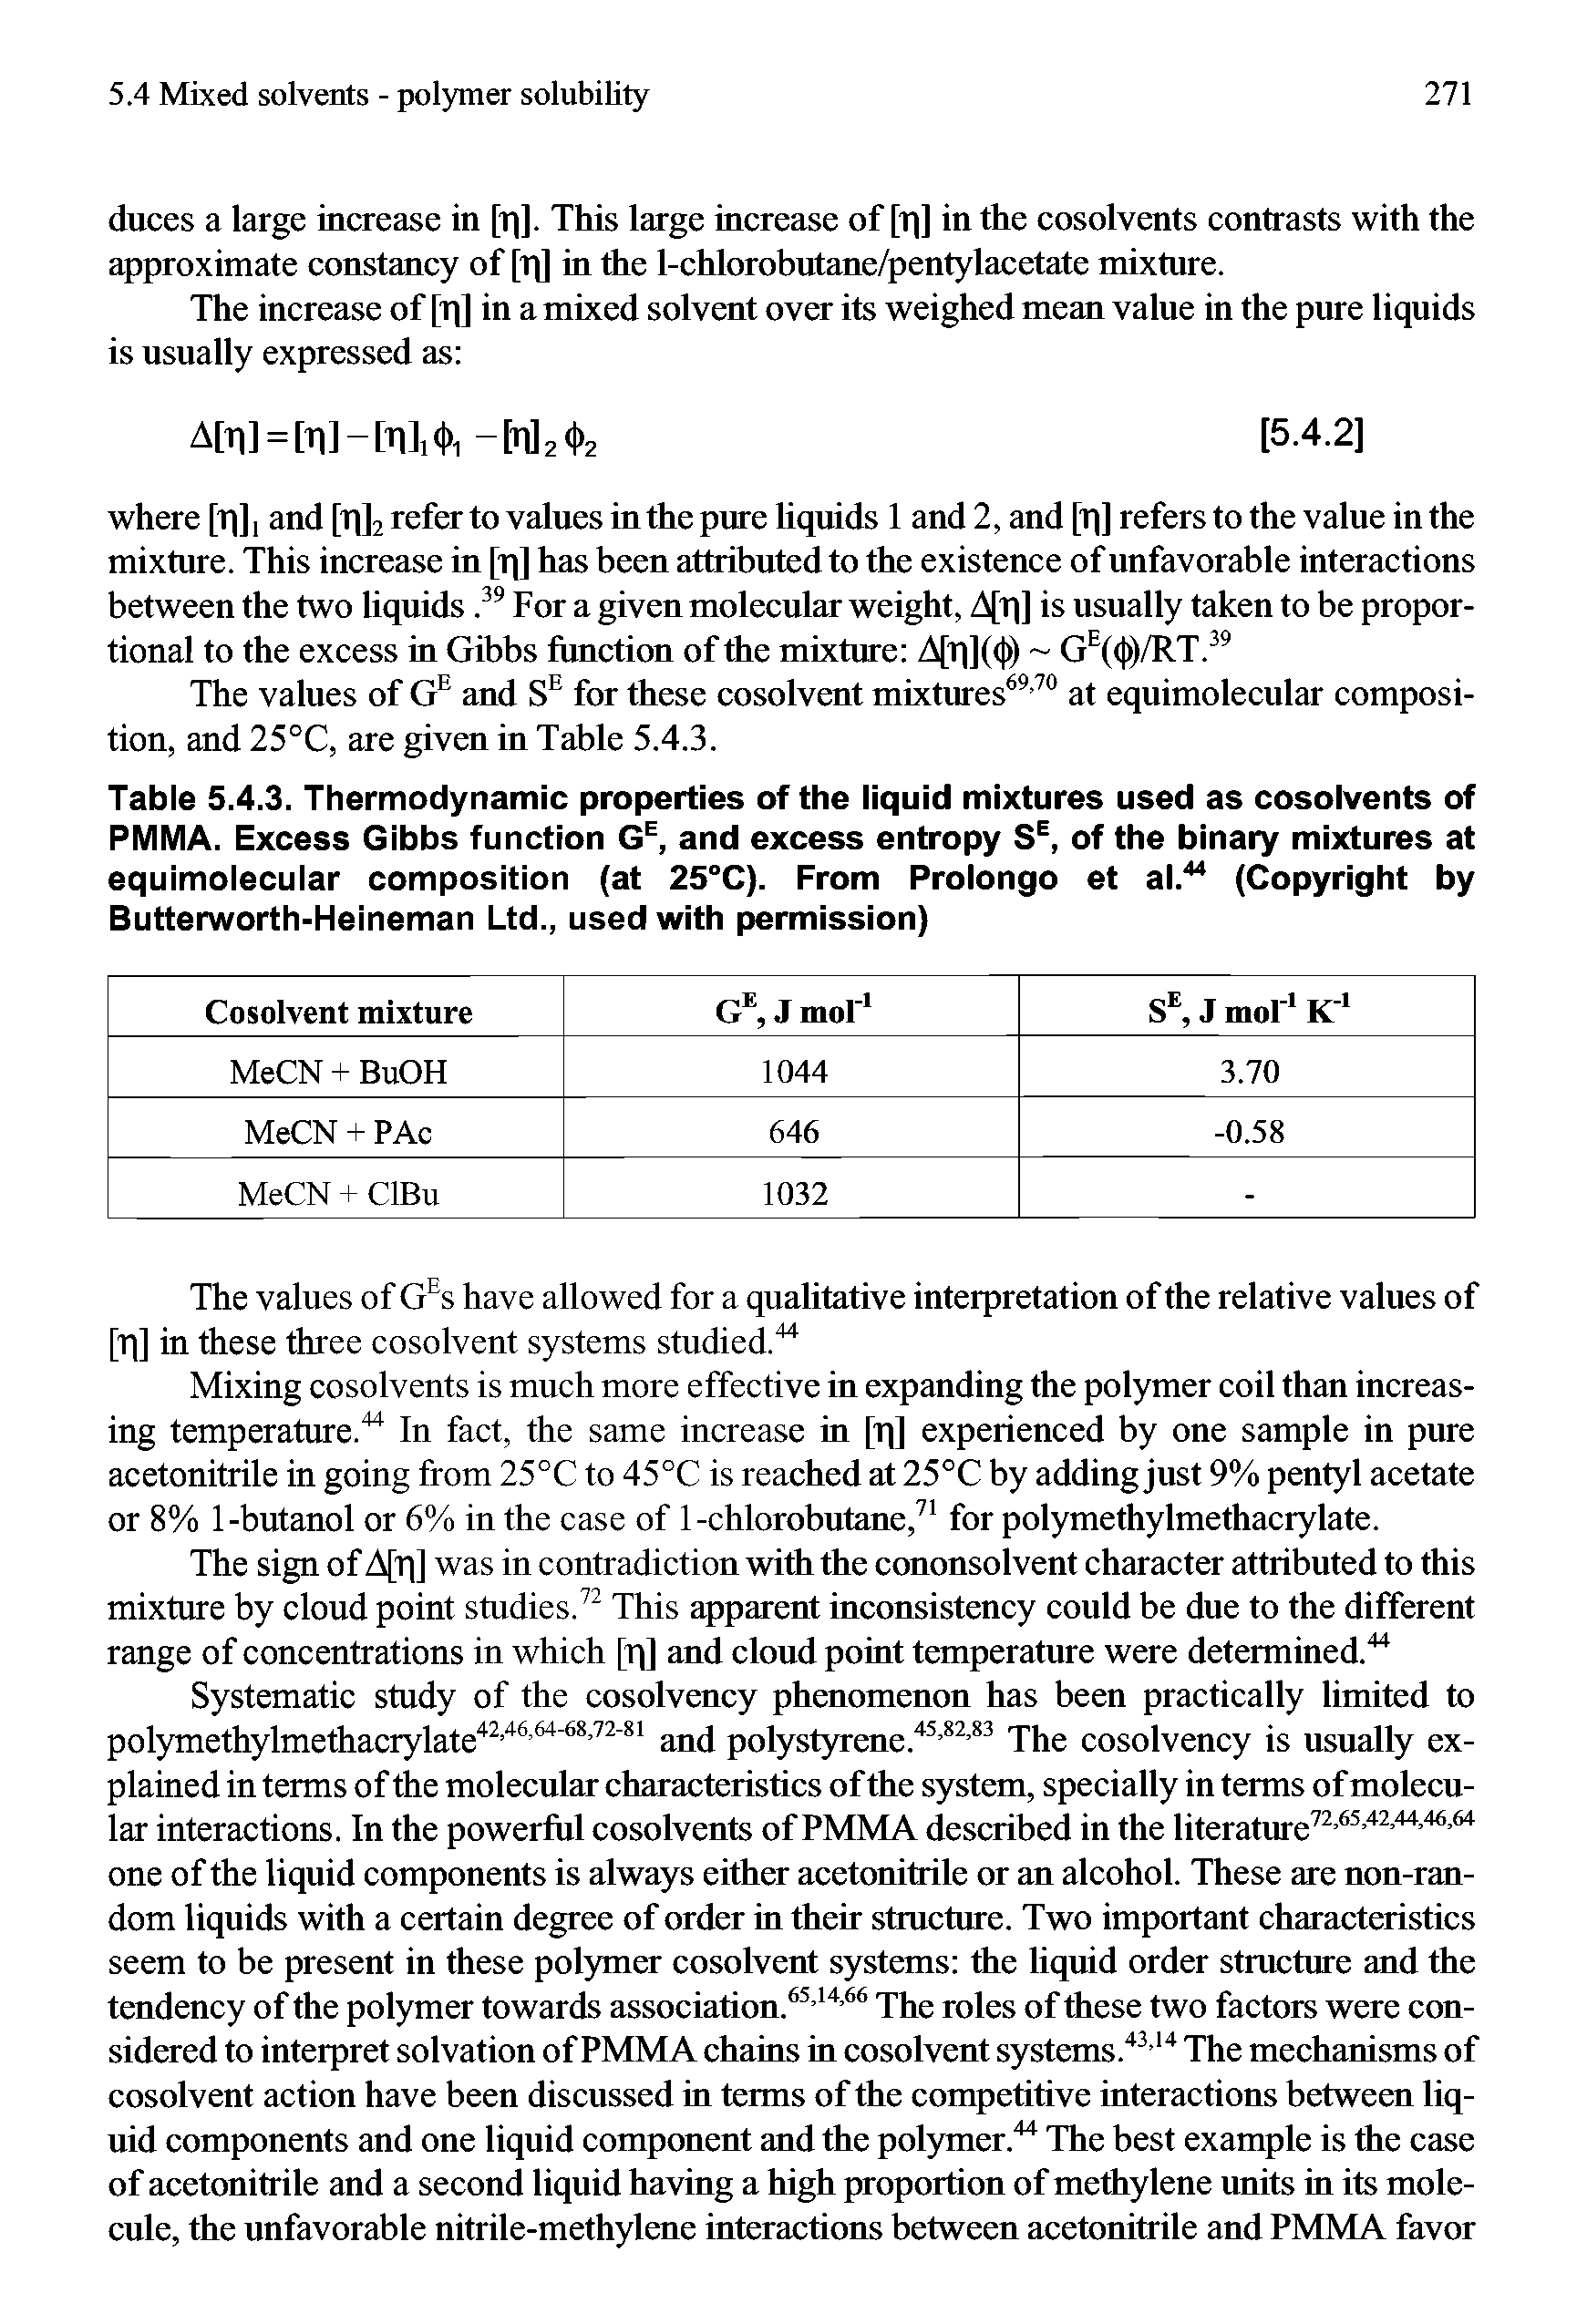 Table 5.4.3. Thermodynamic properties of the liquid mixtures used as cosolvents of PMMA. Excess Gibbs function G, and excess entropy S, of the binary mixtures at equimolecular composition (at 25°C). From Prolongo et al. (Copyright by Butterworth-Heineman Ltd., used with permission)...